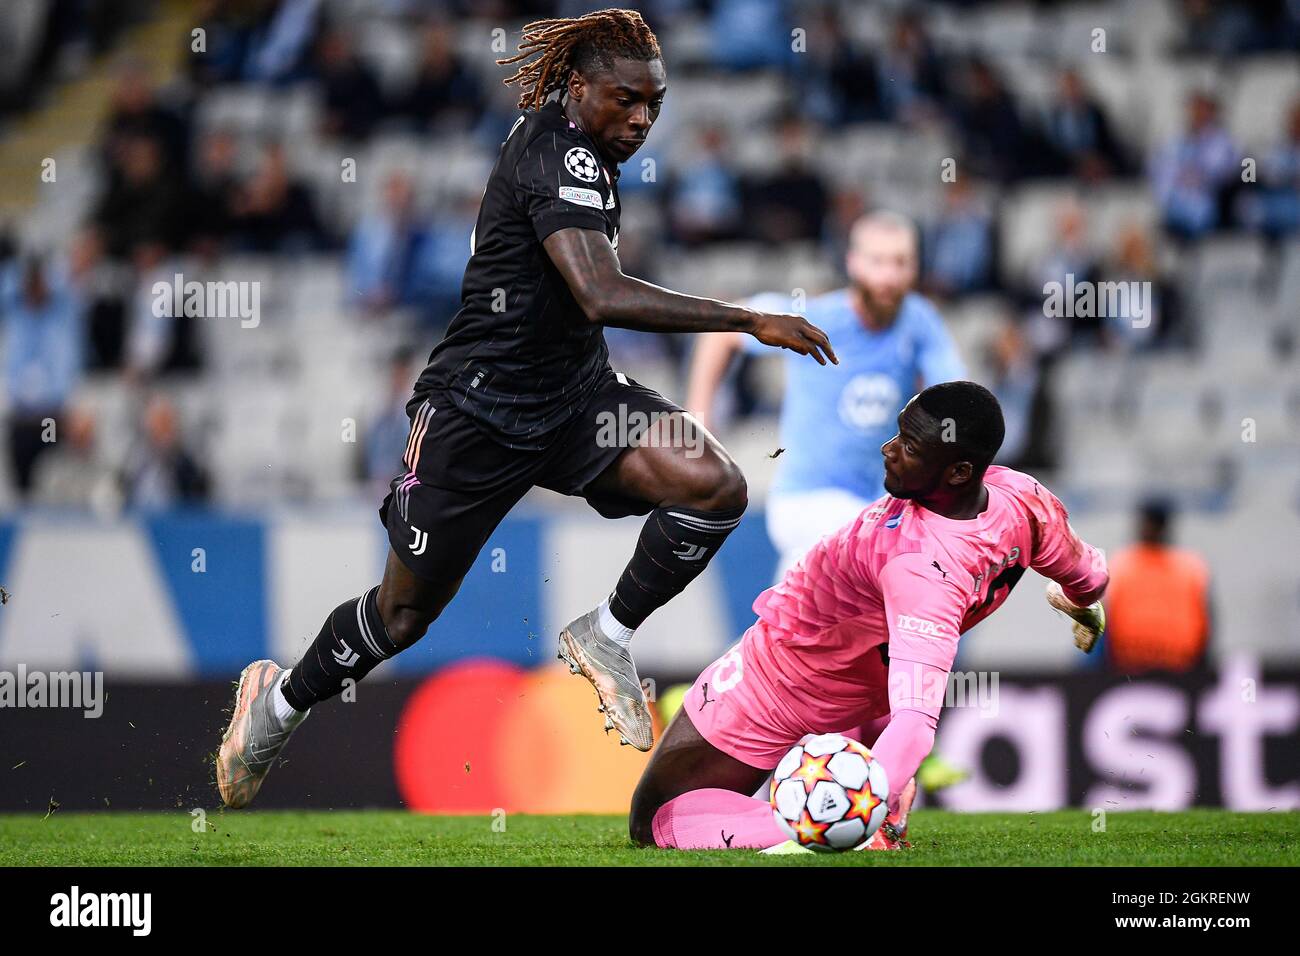 Malmo, Sweden. 14 September 2021. Moise Kean (L) of Juventus FC and Ismael Diawara of Malmo FF compete for the ball during the UEFA Champions League football match between Malmo FF and Juventus FC. Credit: Nicolò Campo/Alamy Live News Stock Photo